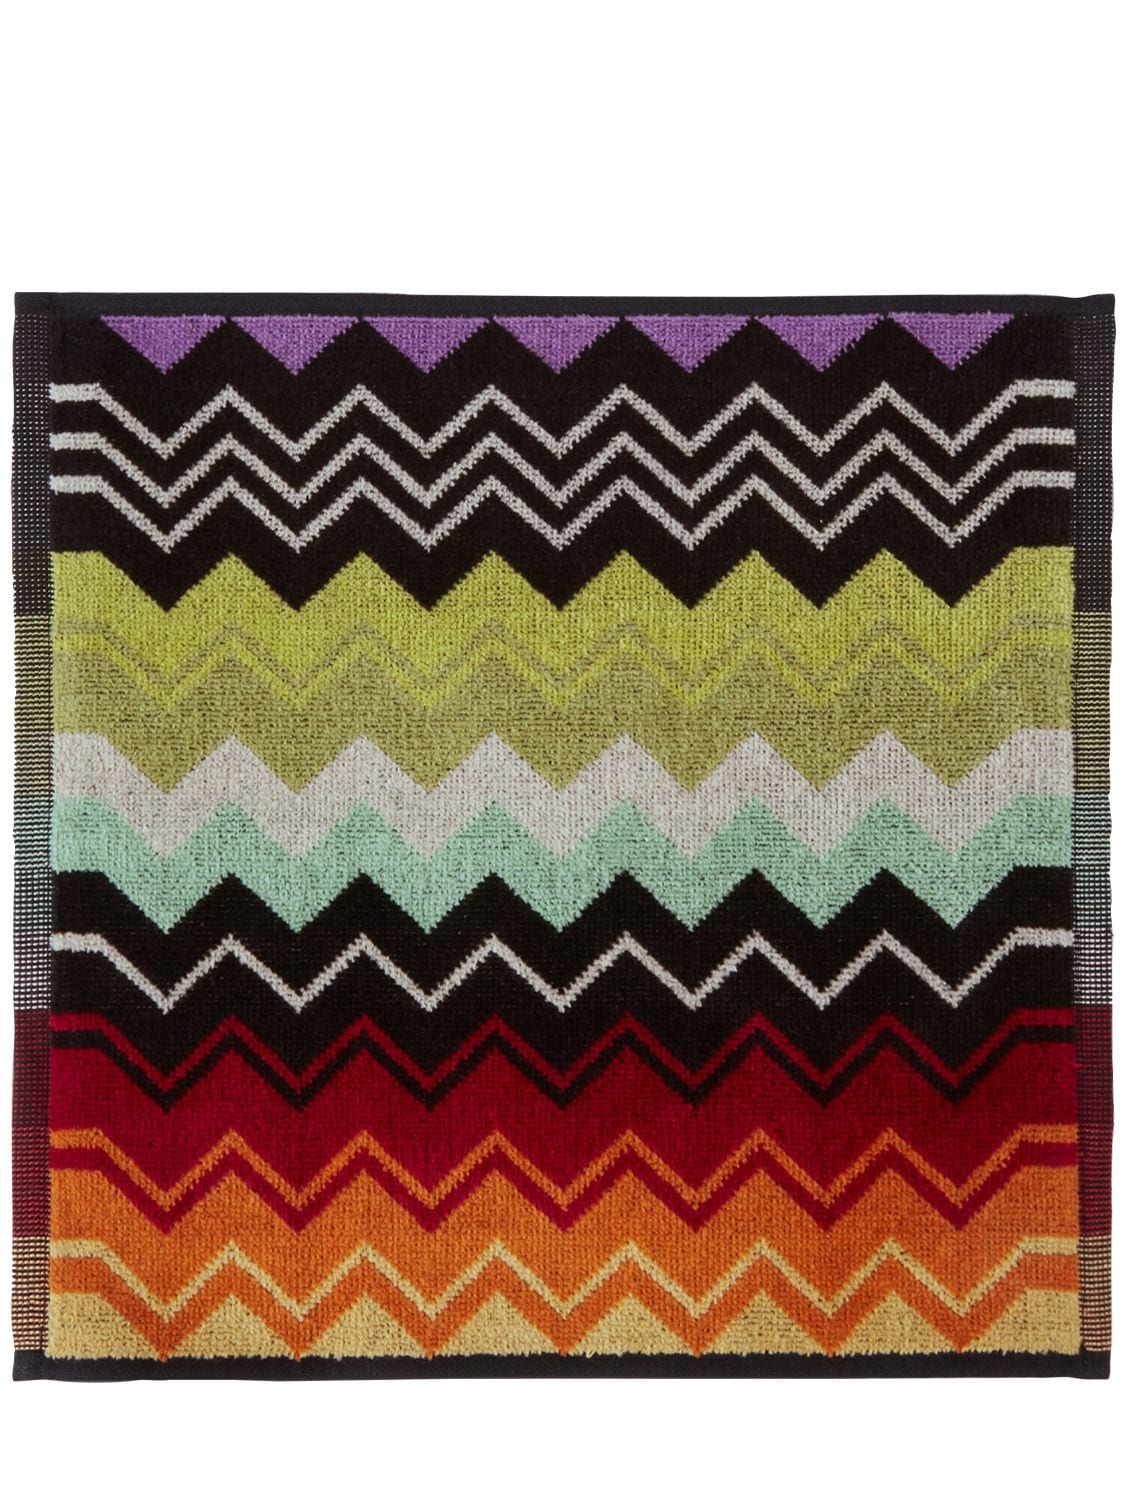 Shop Missoni Home Collection Giacomo Set Of 6 Cotton Hand Towels In Multicolor